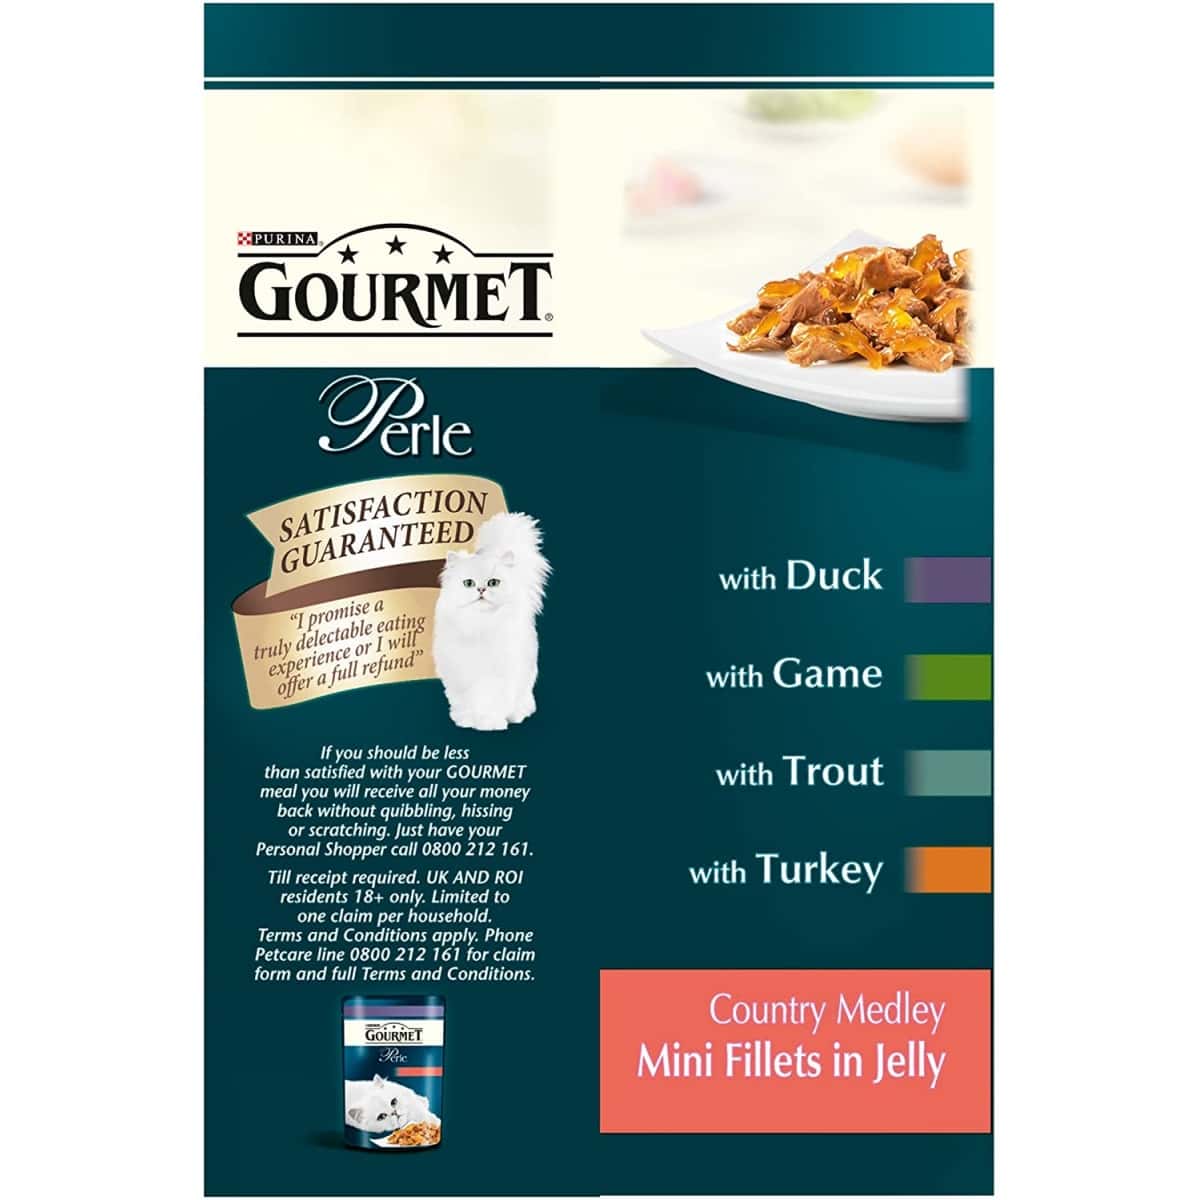 Gourmet Perle Country Medley in Jelly 12 x 85g Product Image